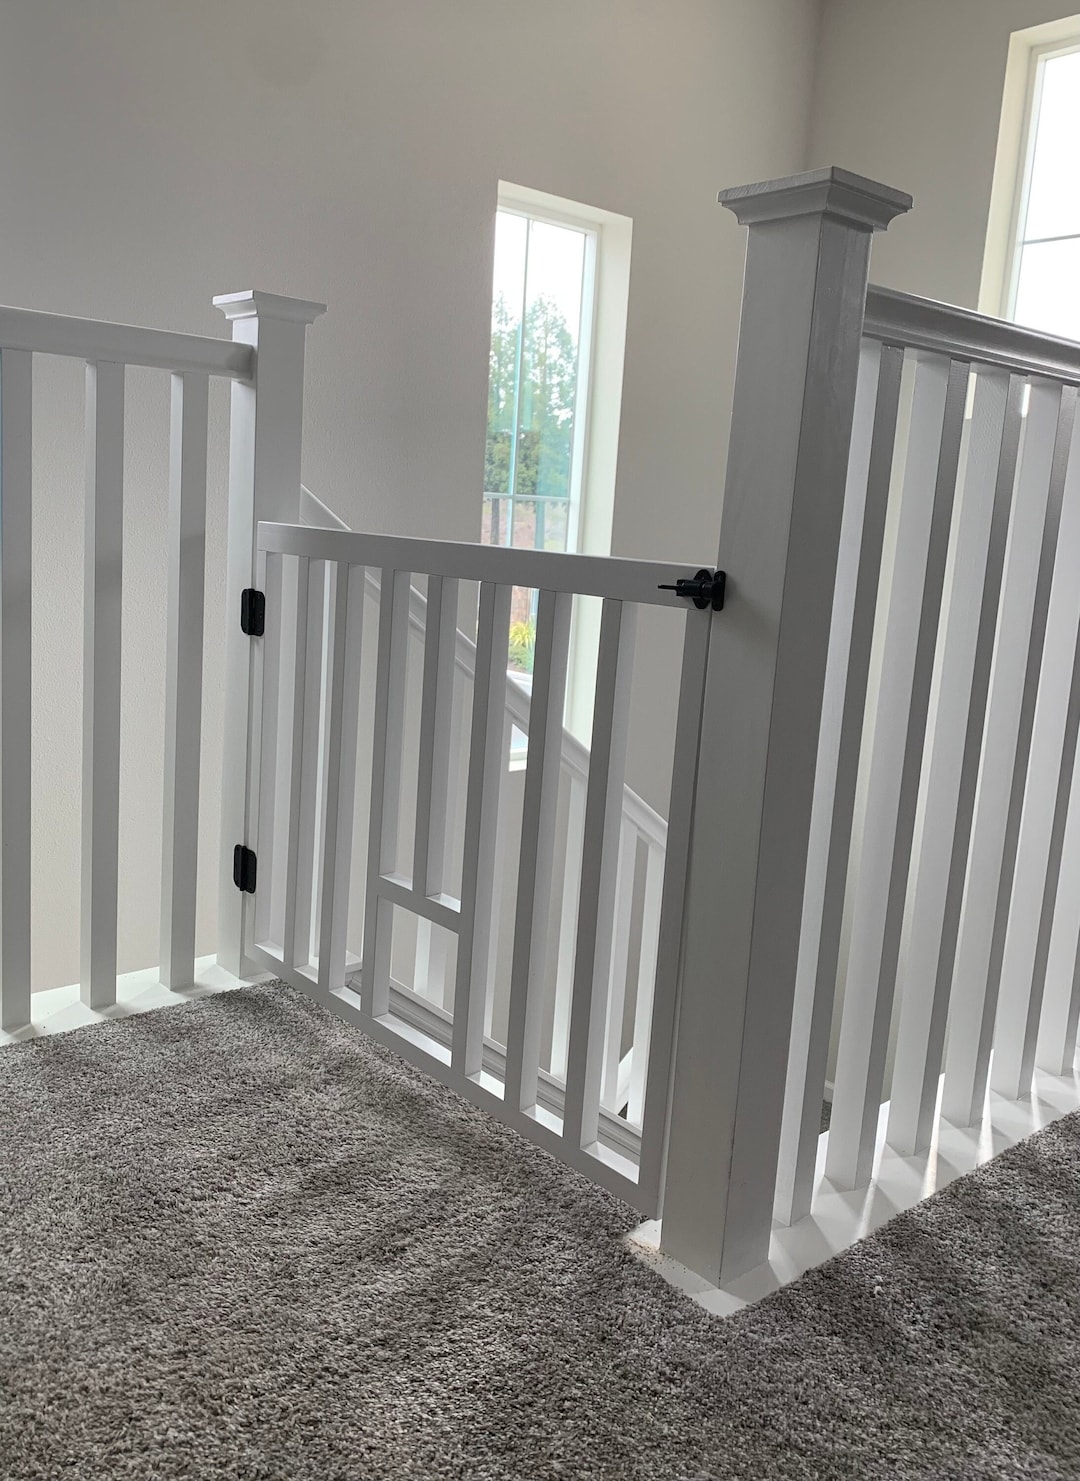 Custom Spindle Wooden Gate Baby Gate Stairway Gate White Wooden Baby ...